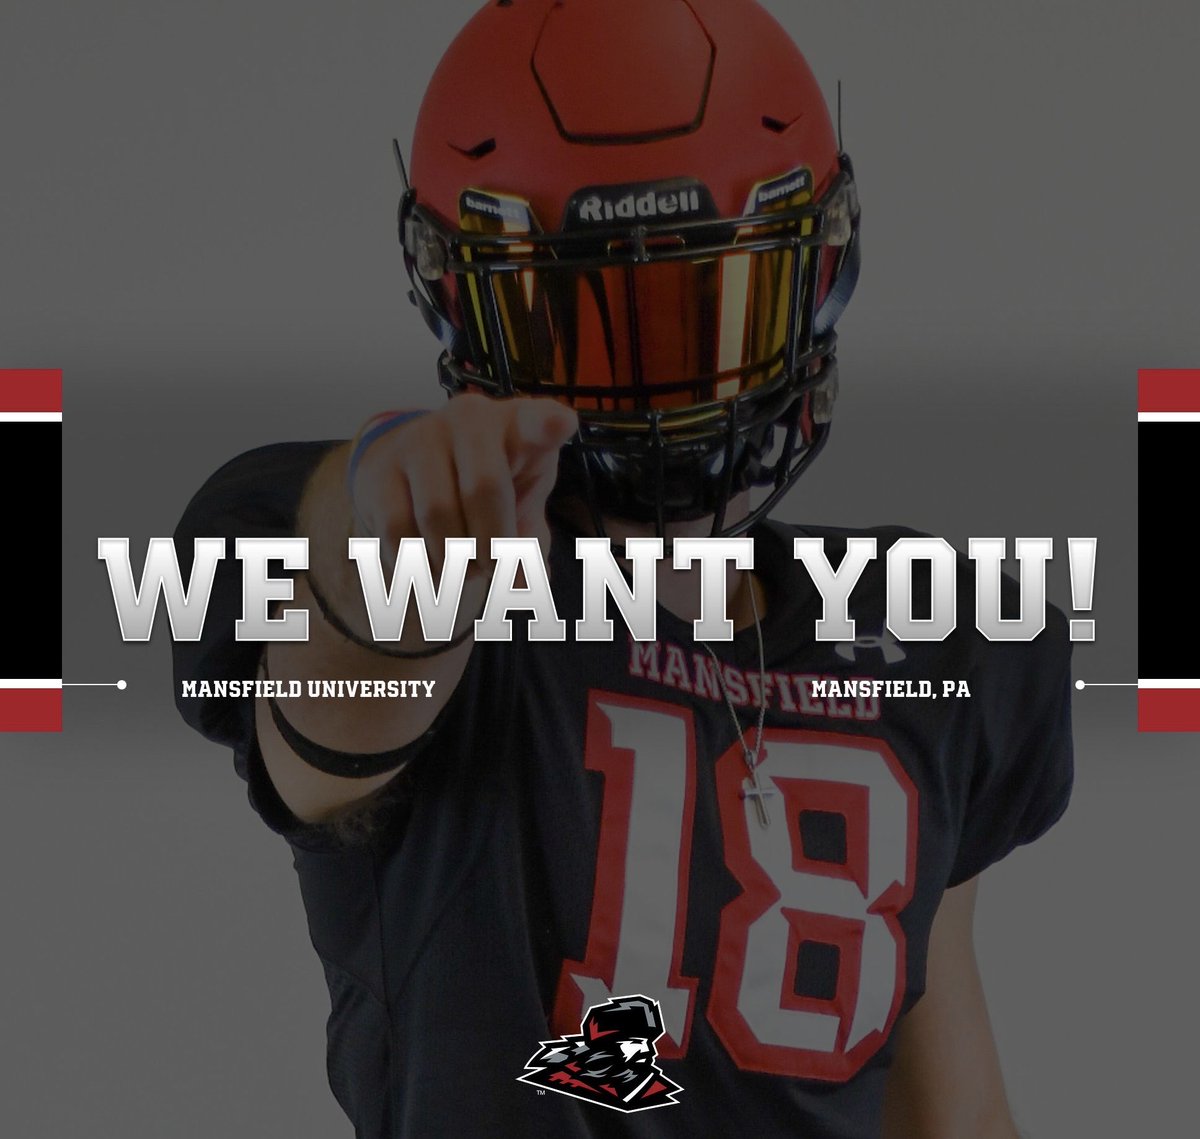 💥Class of 2024 and transfers!!!💥

MANSFIELD UNIVERSITY IS THE PLACE TO BE! 

We compete in the CSFL, all players weigh 178lbs or less. 

Dorms are in the top 10 in the nation!

Average cost after aid: 12k 

Come make history with the Mountaineers!